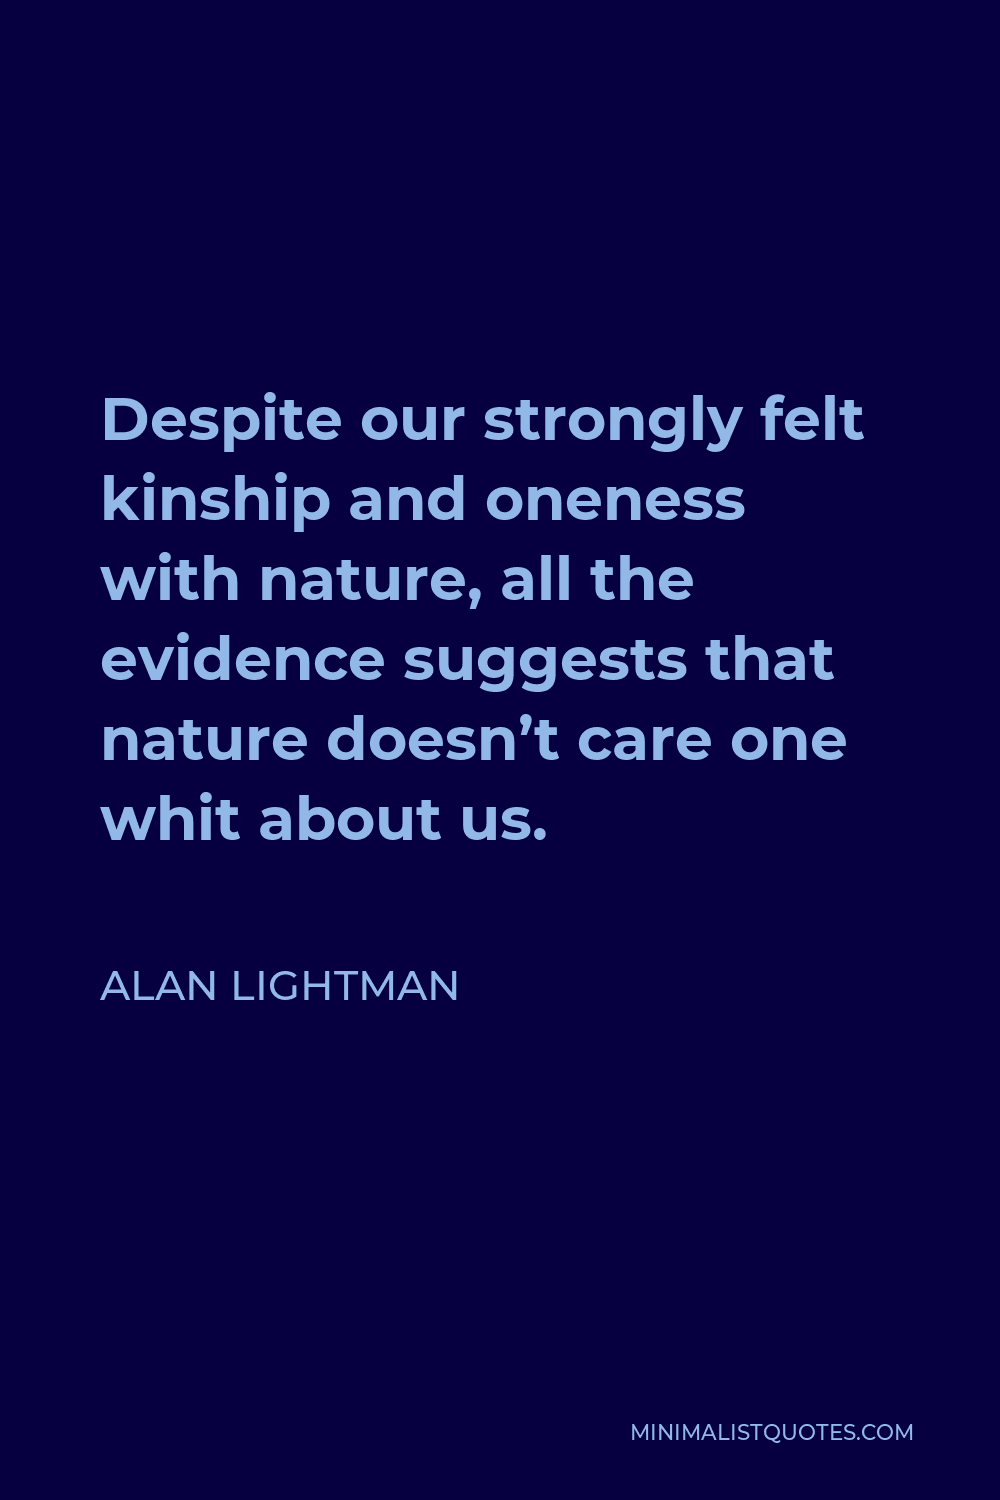 Alan Lightman Quote - Despite our strongly felt kinship and oneness with nature, all the evidence suggests that nature doesn’t care one whit about us.